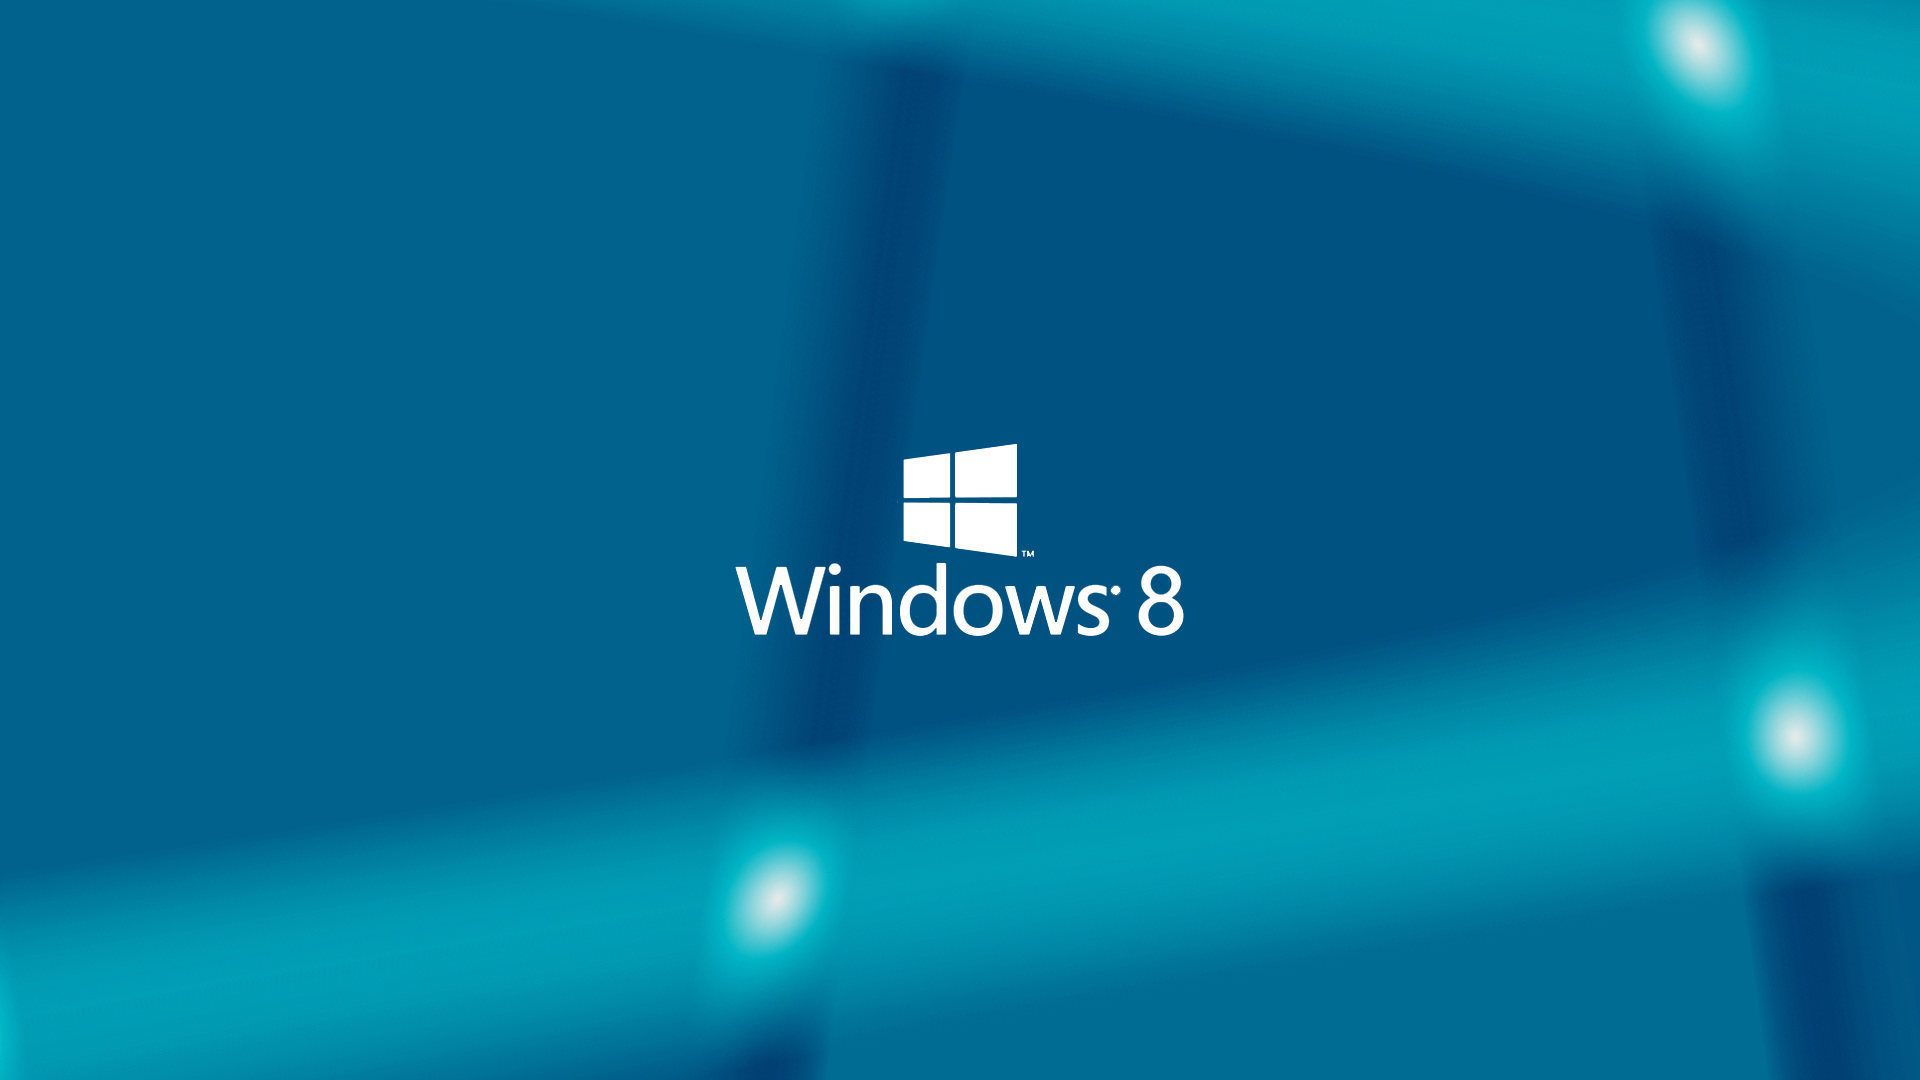 Windows 8 HQ wallpapers Full HD Pictures